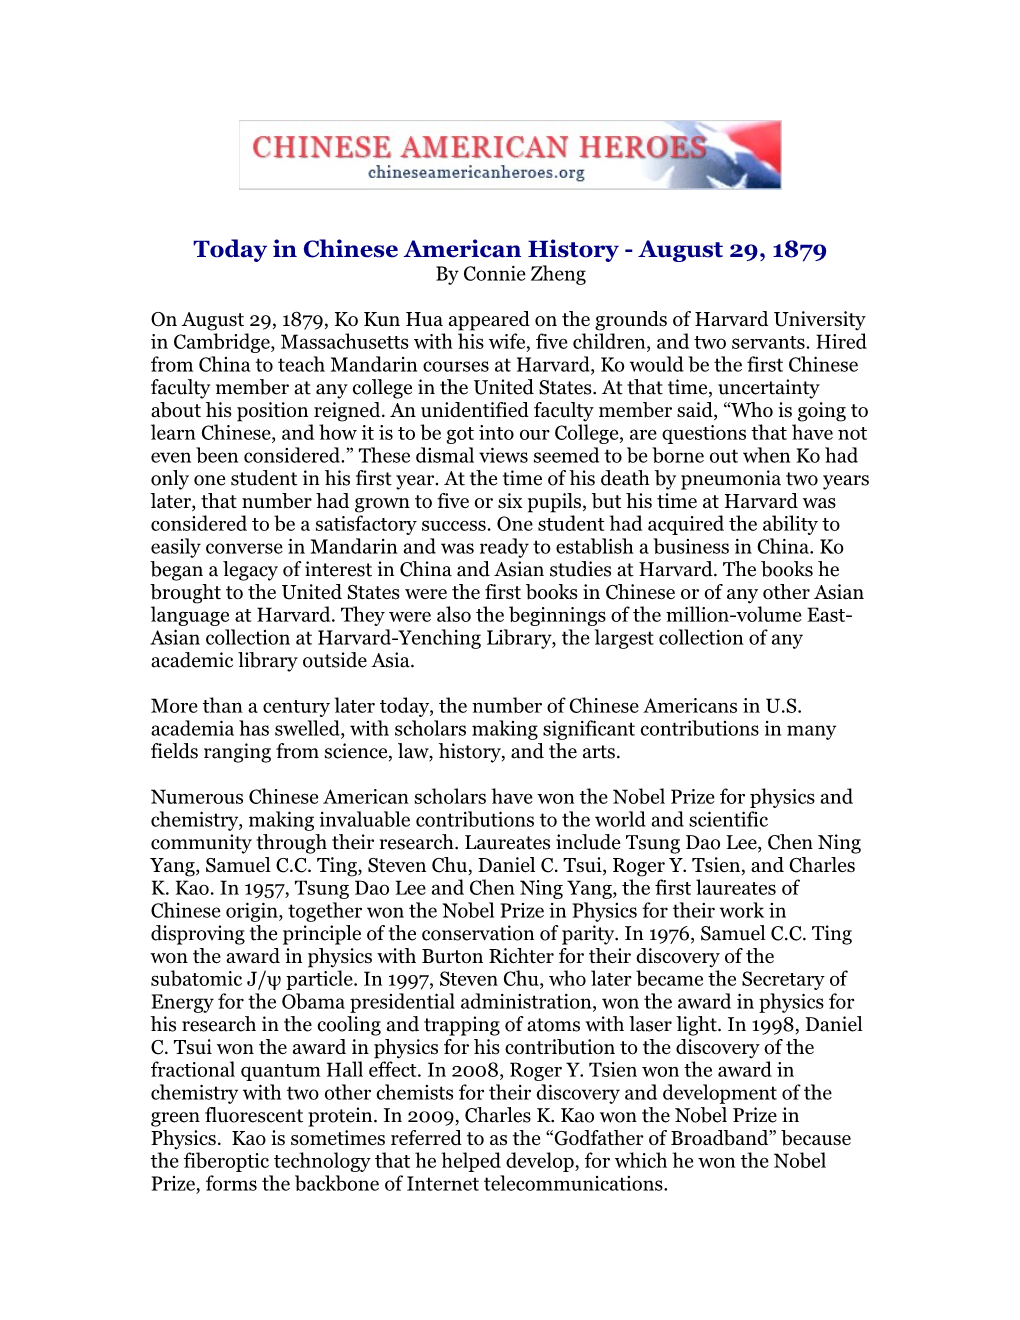 Today in Chinese American History - August 29, 1879 by Connie Zheng